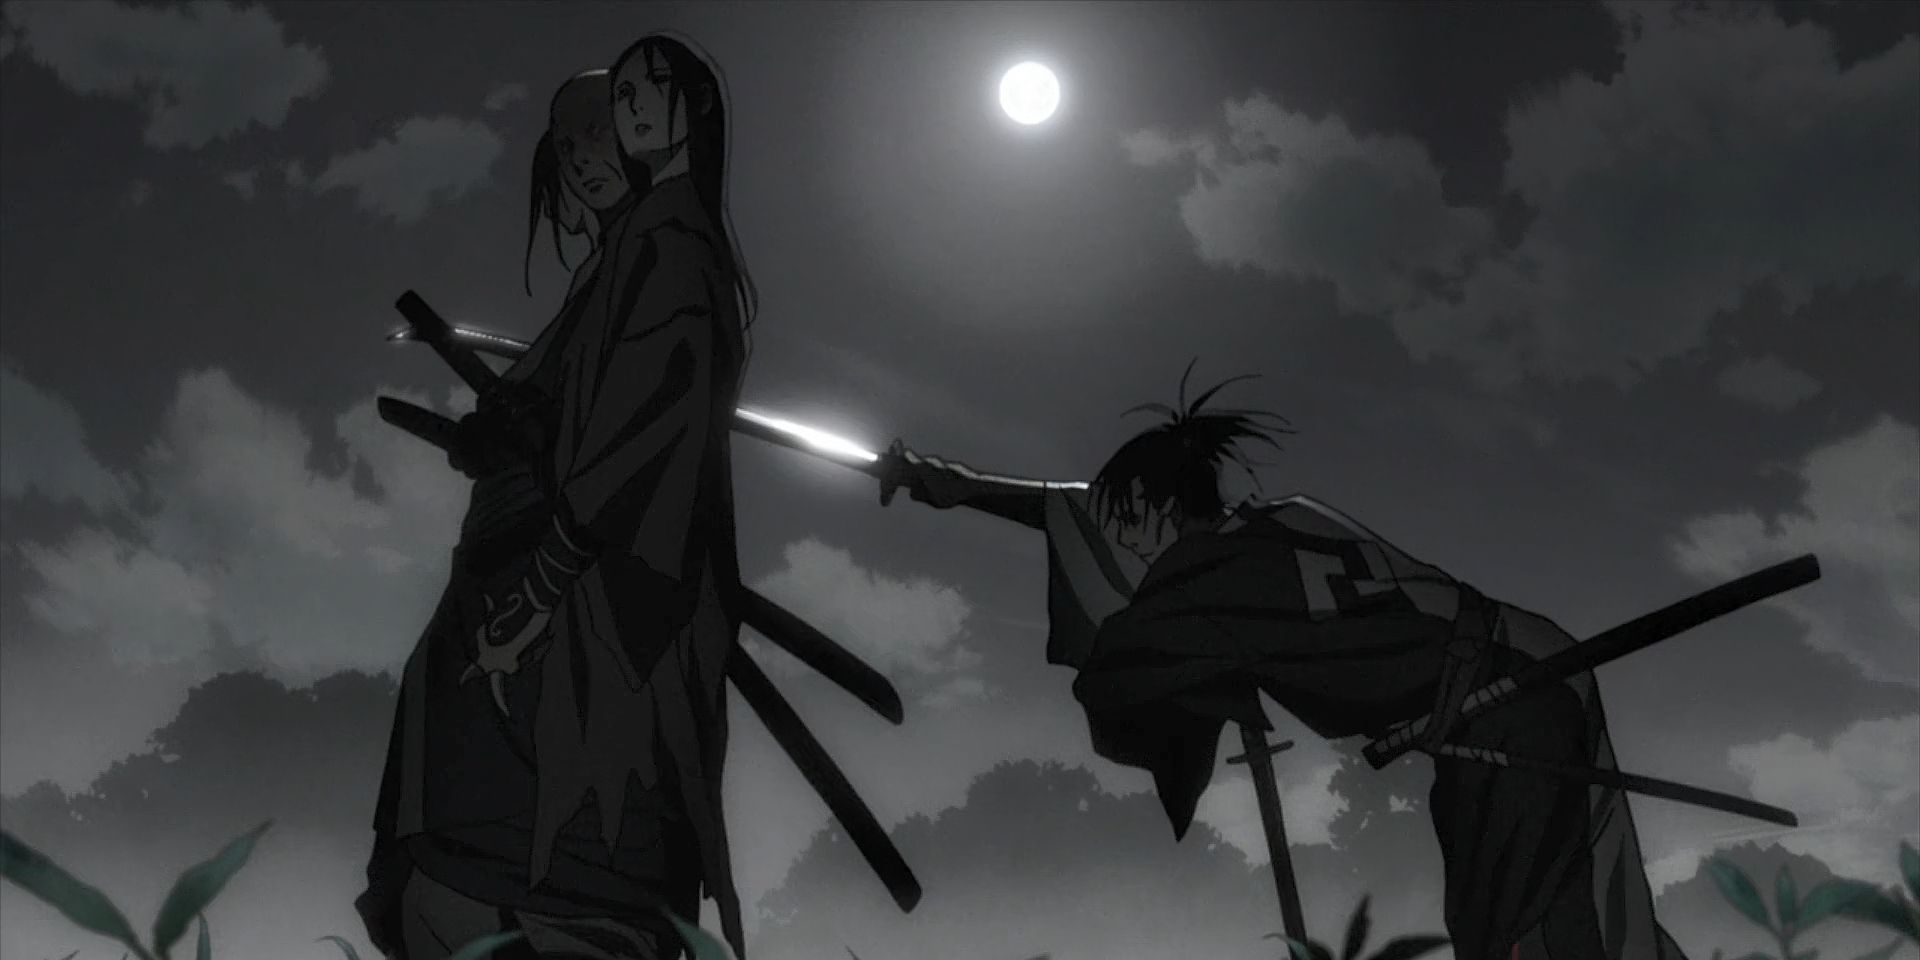 Blade Of The Immortal duel image.